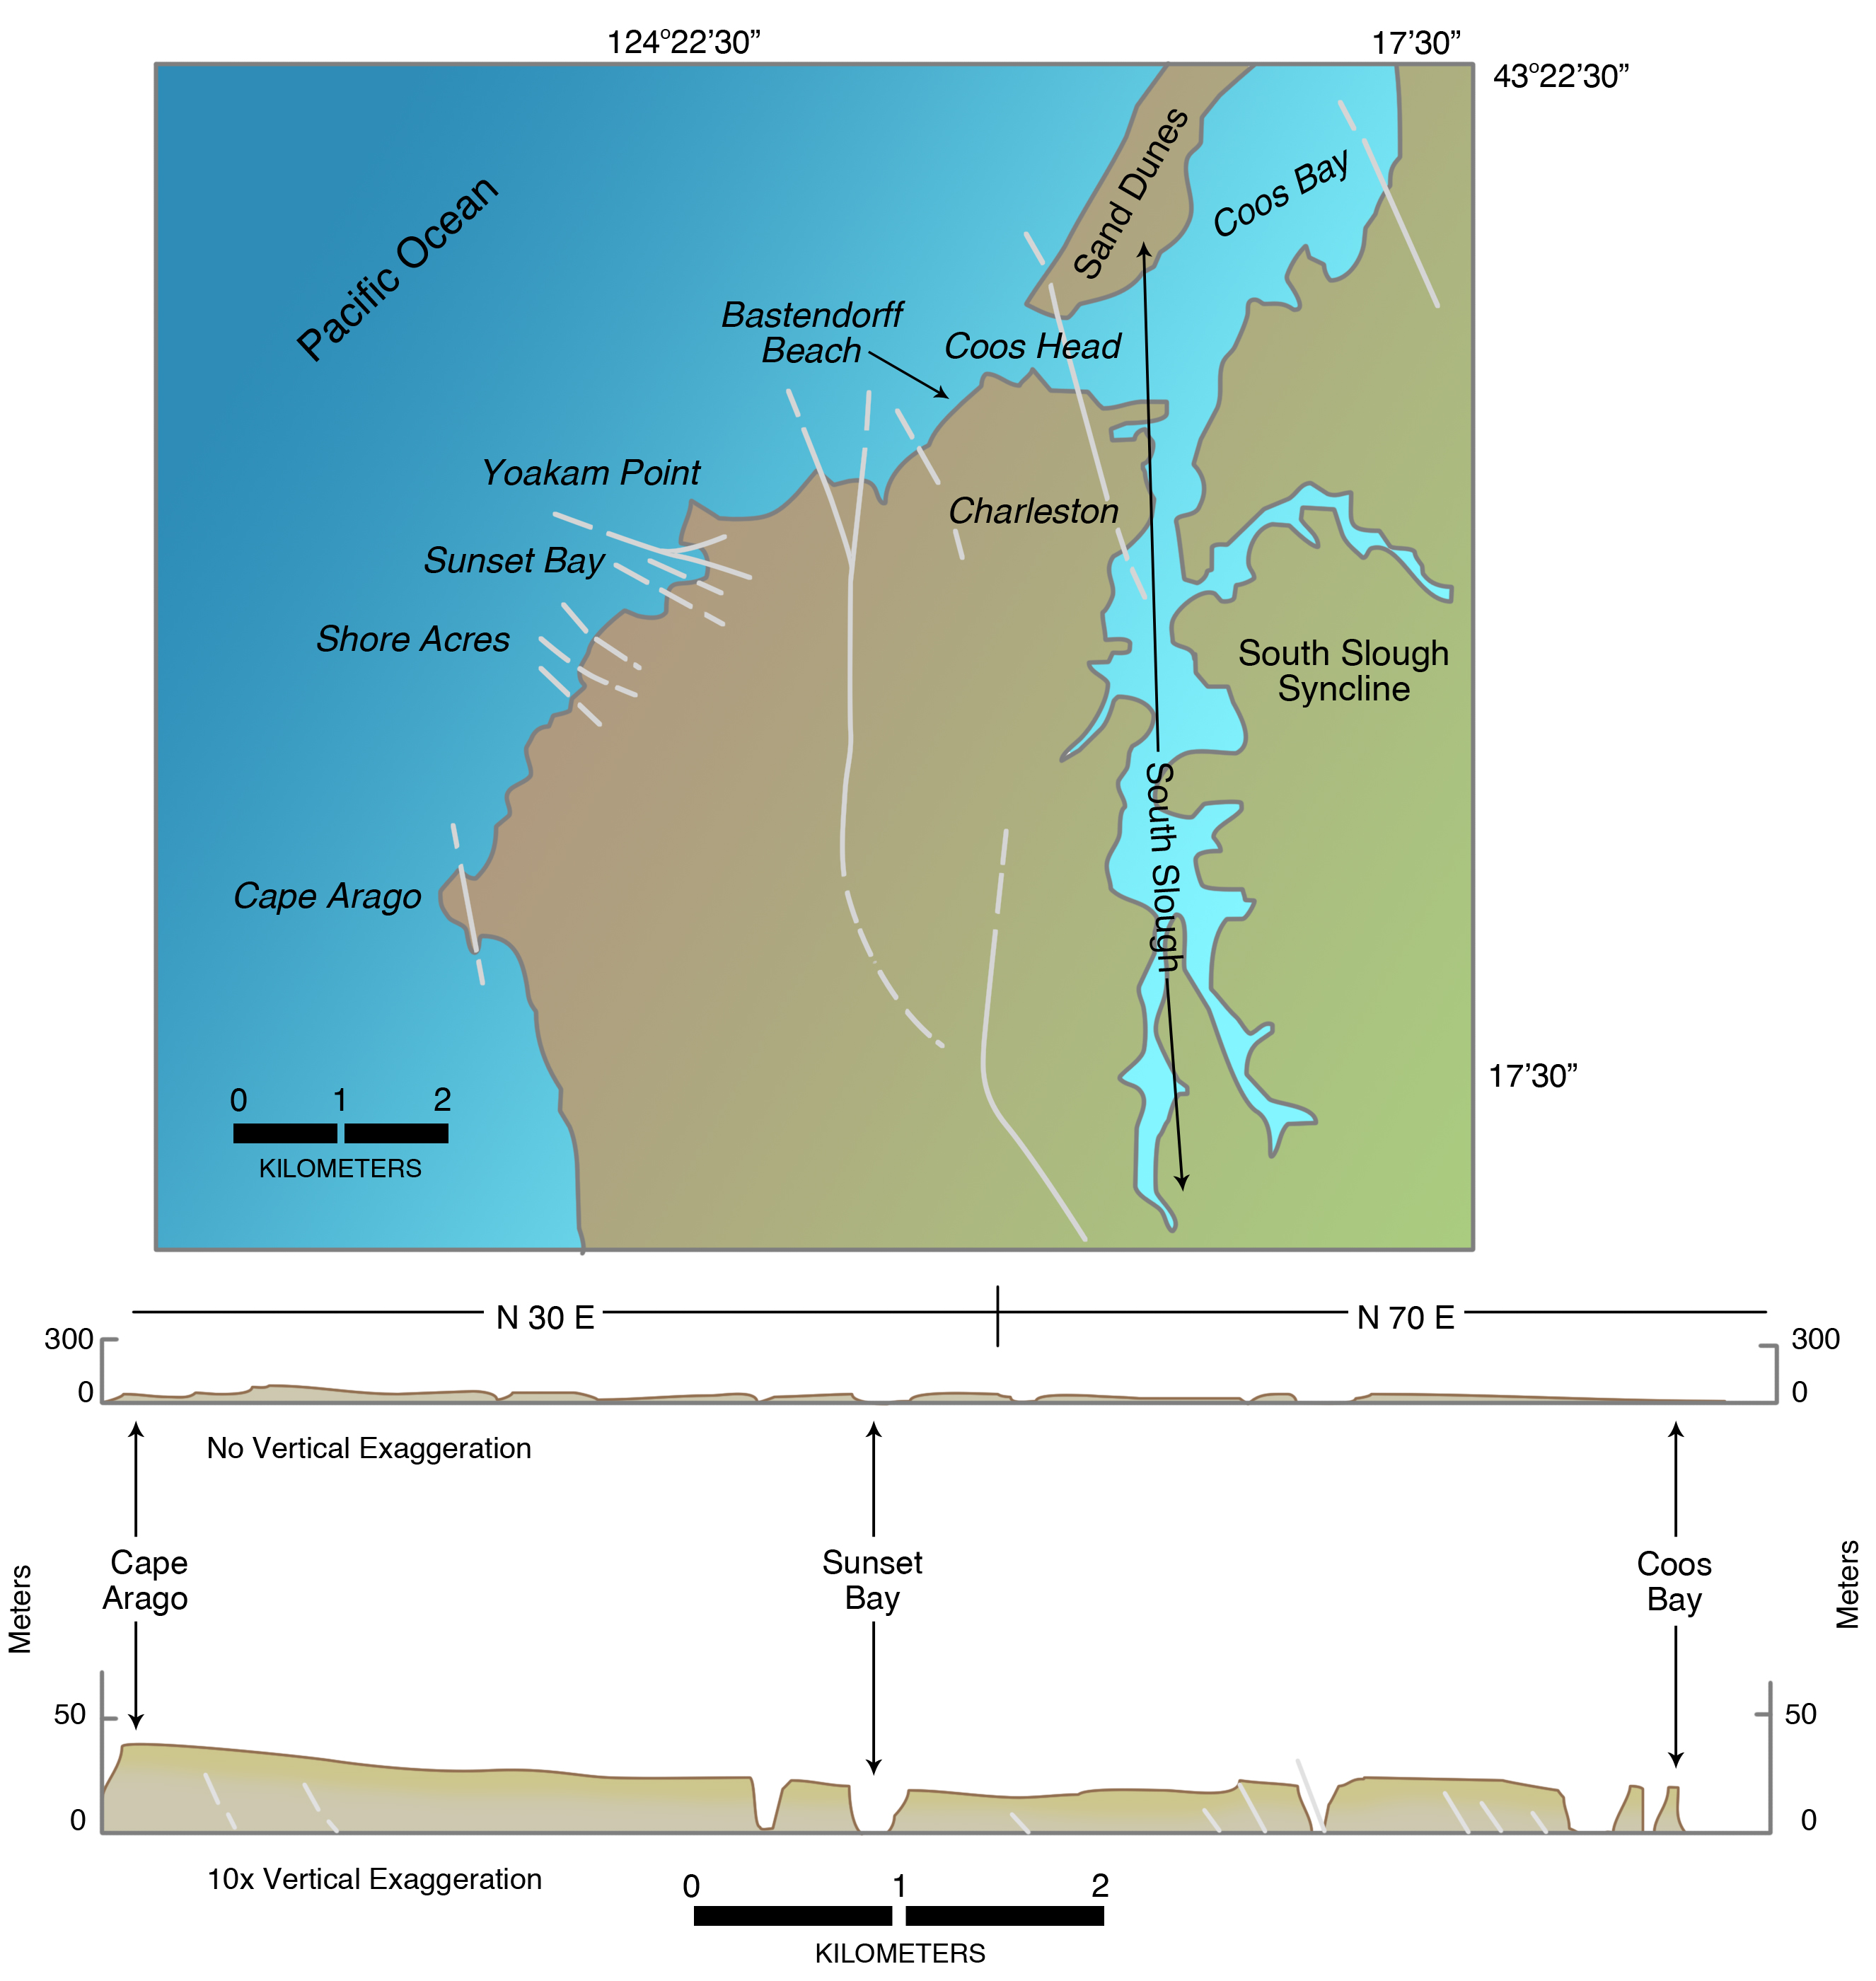 (Top) Map of Cape Arago-Coos Bay region, southwest Oregon, showing marine terrace platforms and active faults.